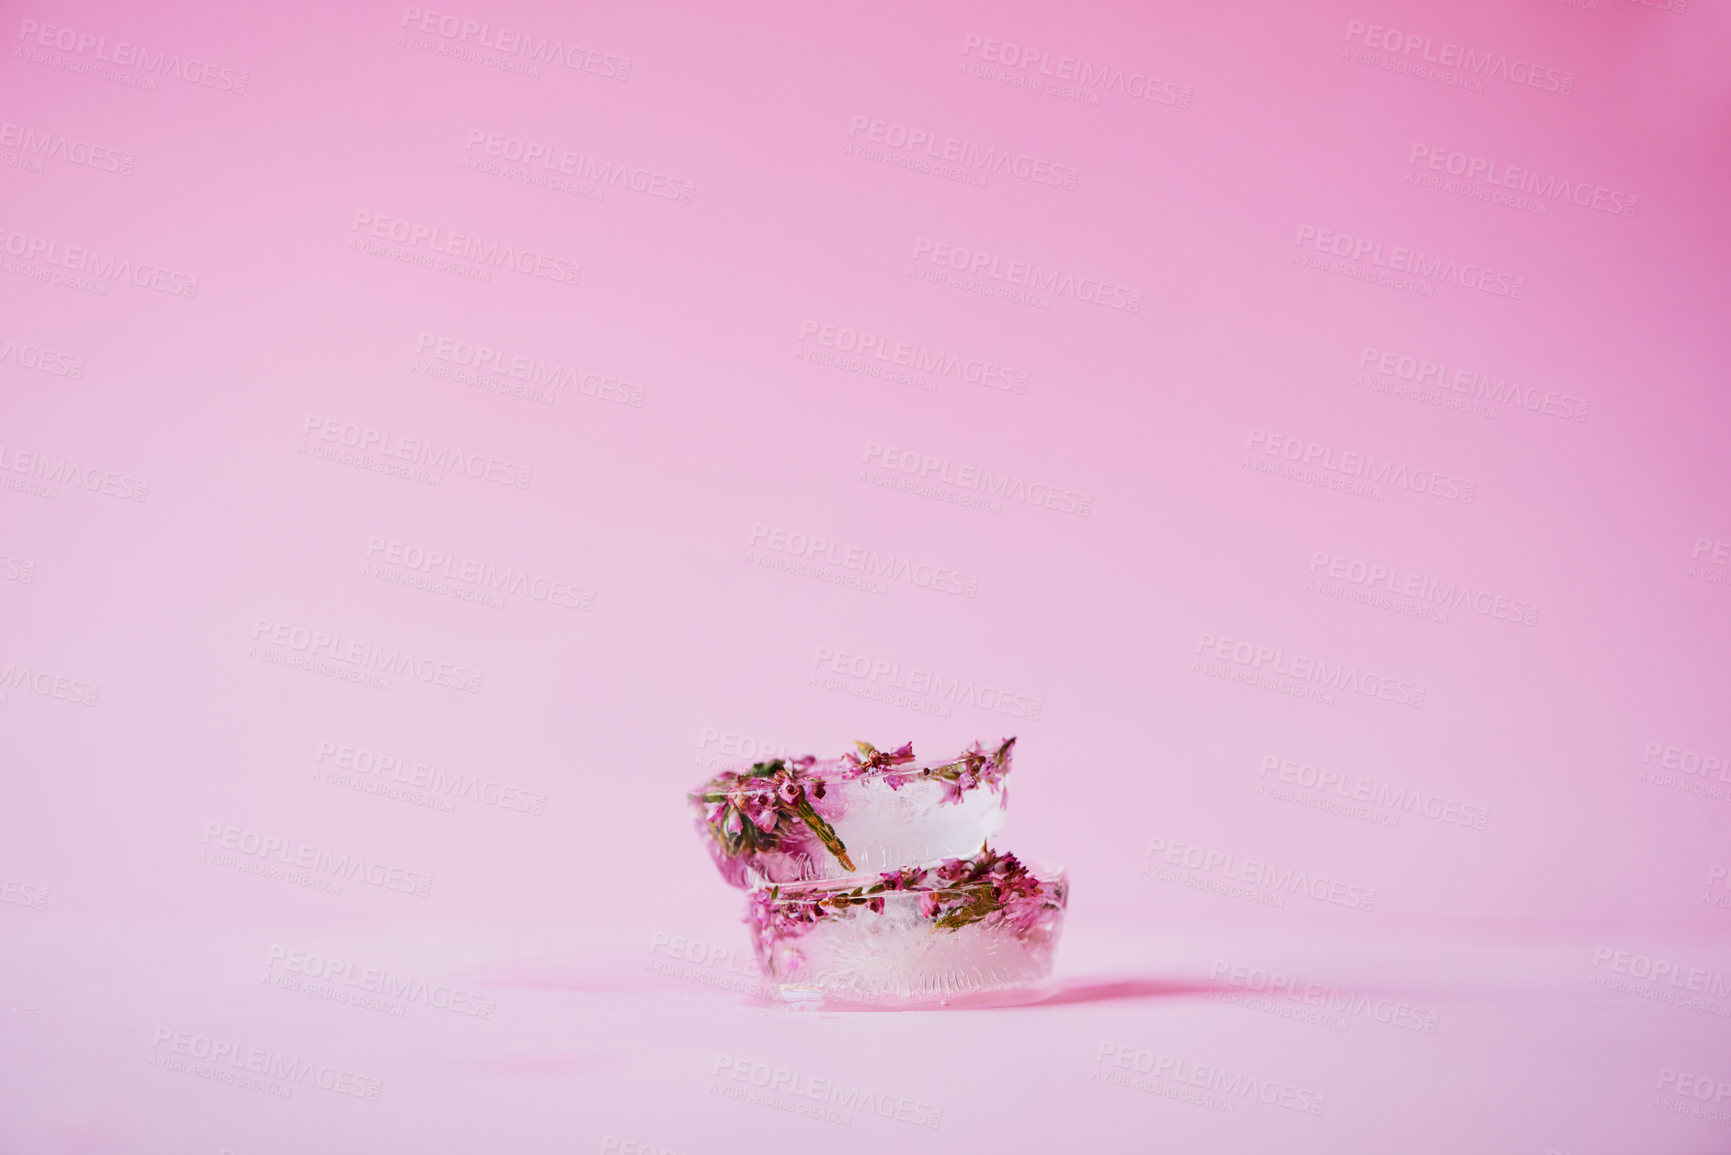 Buy stock photo Studio shot of flowers frozen into ice blocks against a pink background